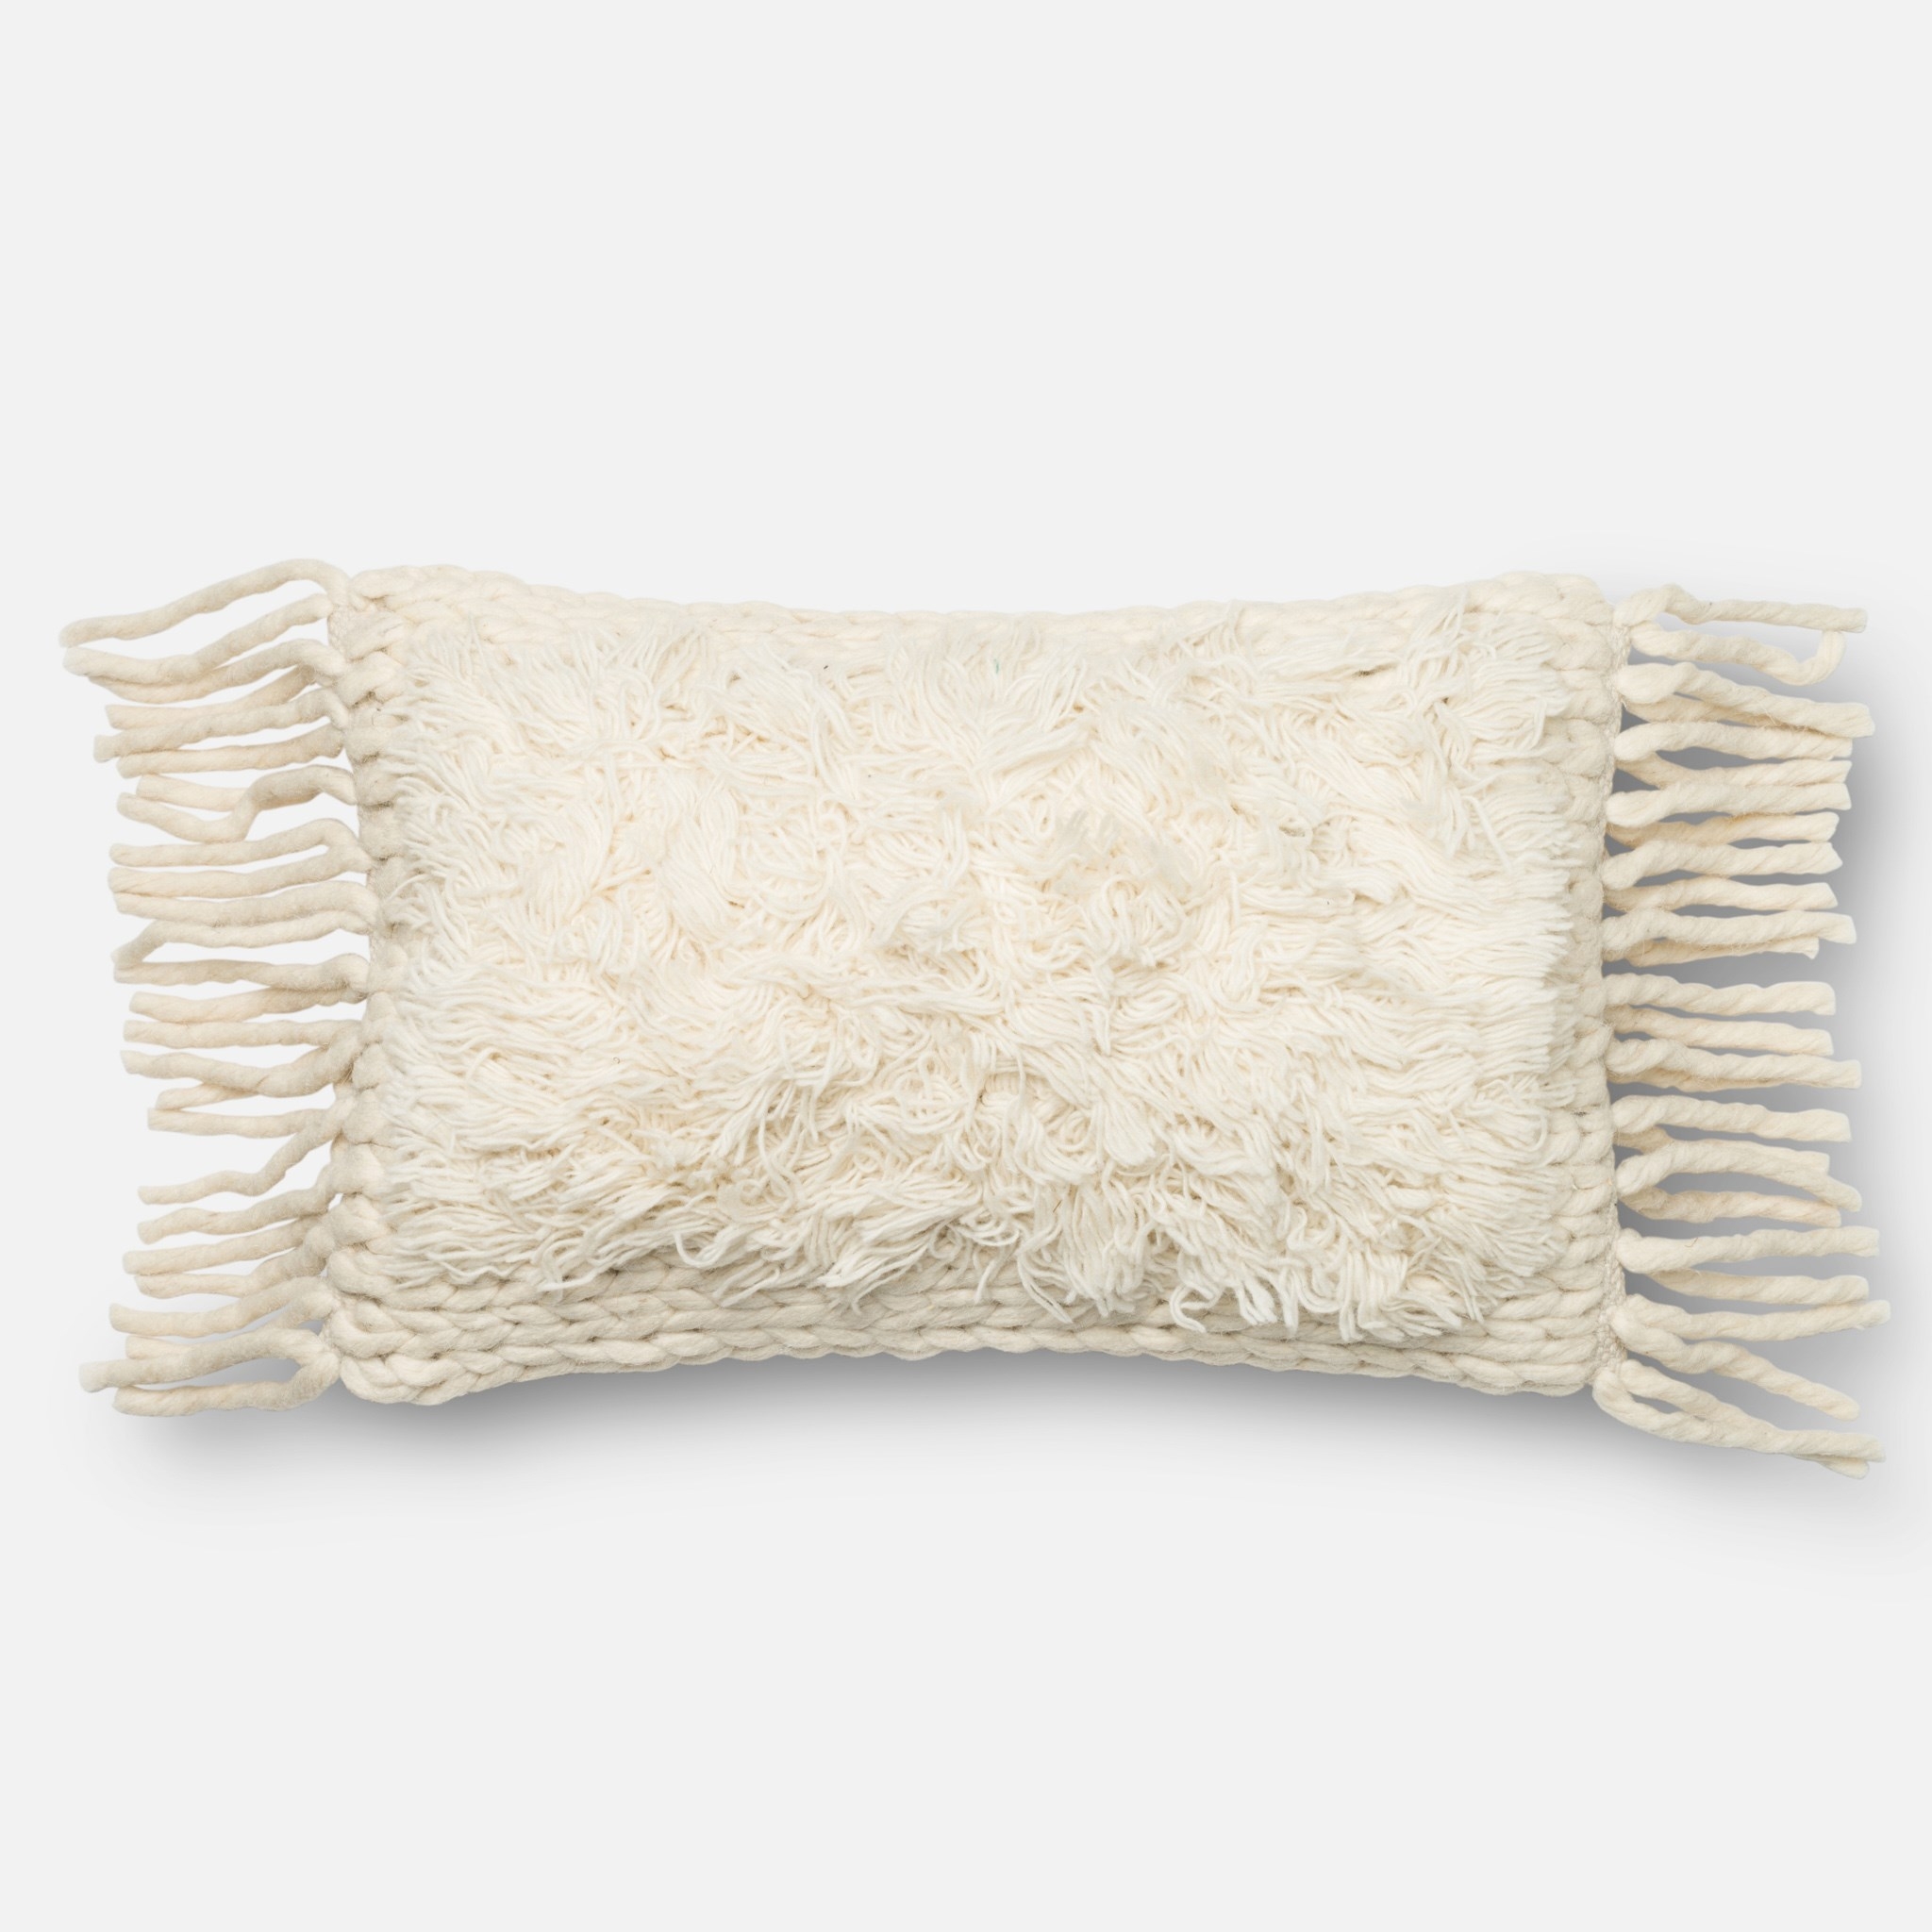 P0326 IVORY Pillow - 13" x 21" - COVER ONLY - Image 0